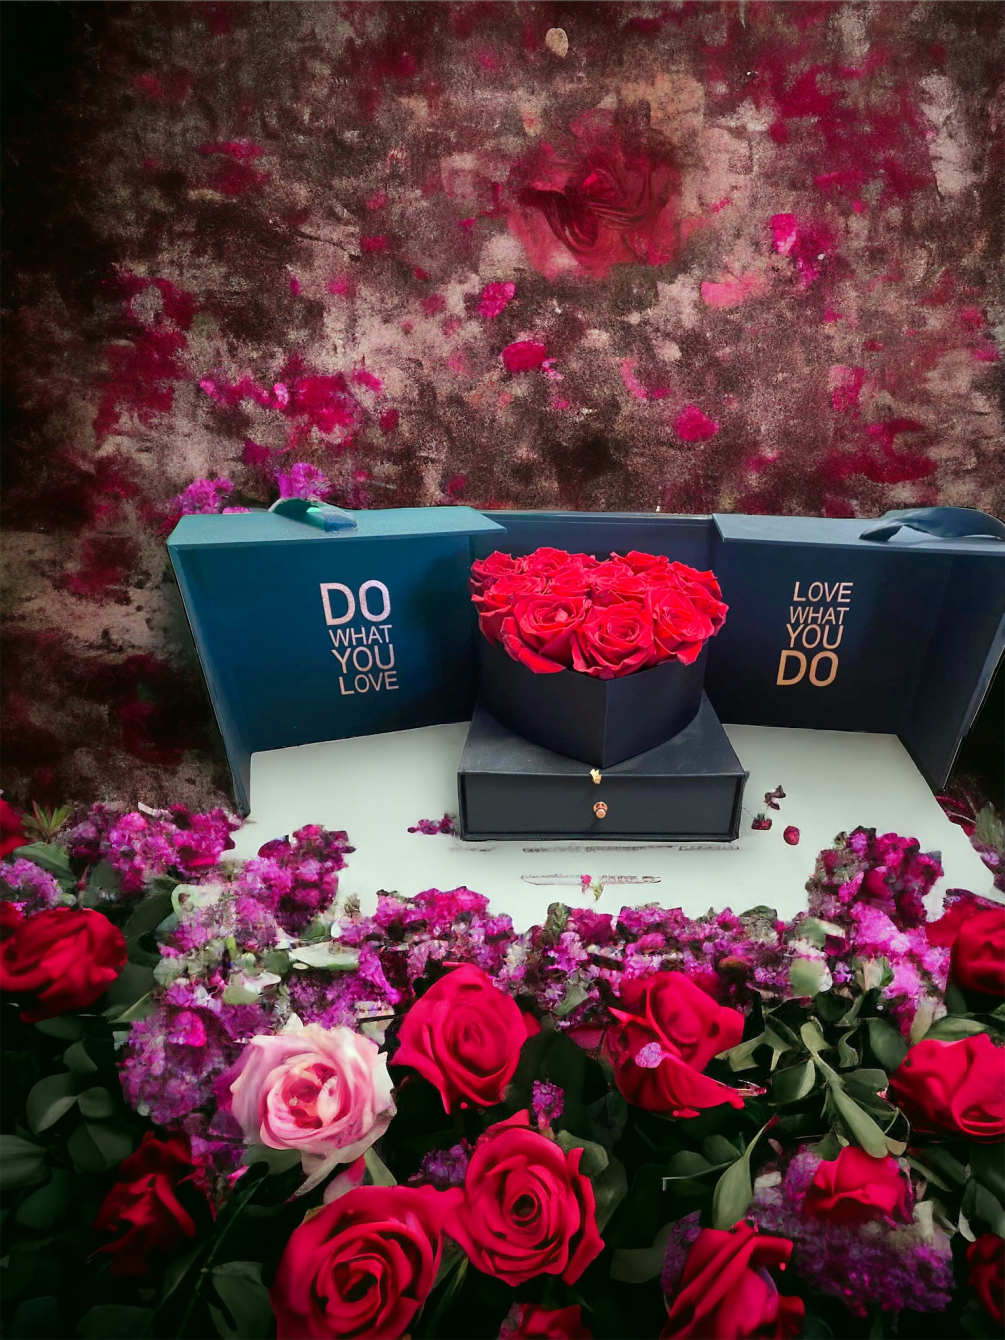 A beautiful presentation like no other!
Black satin box presented to open as